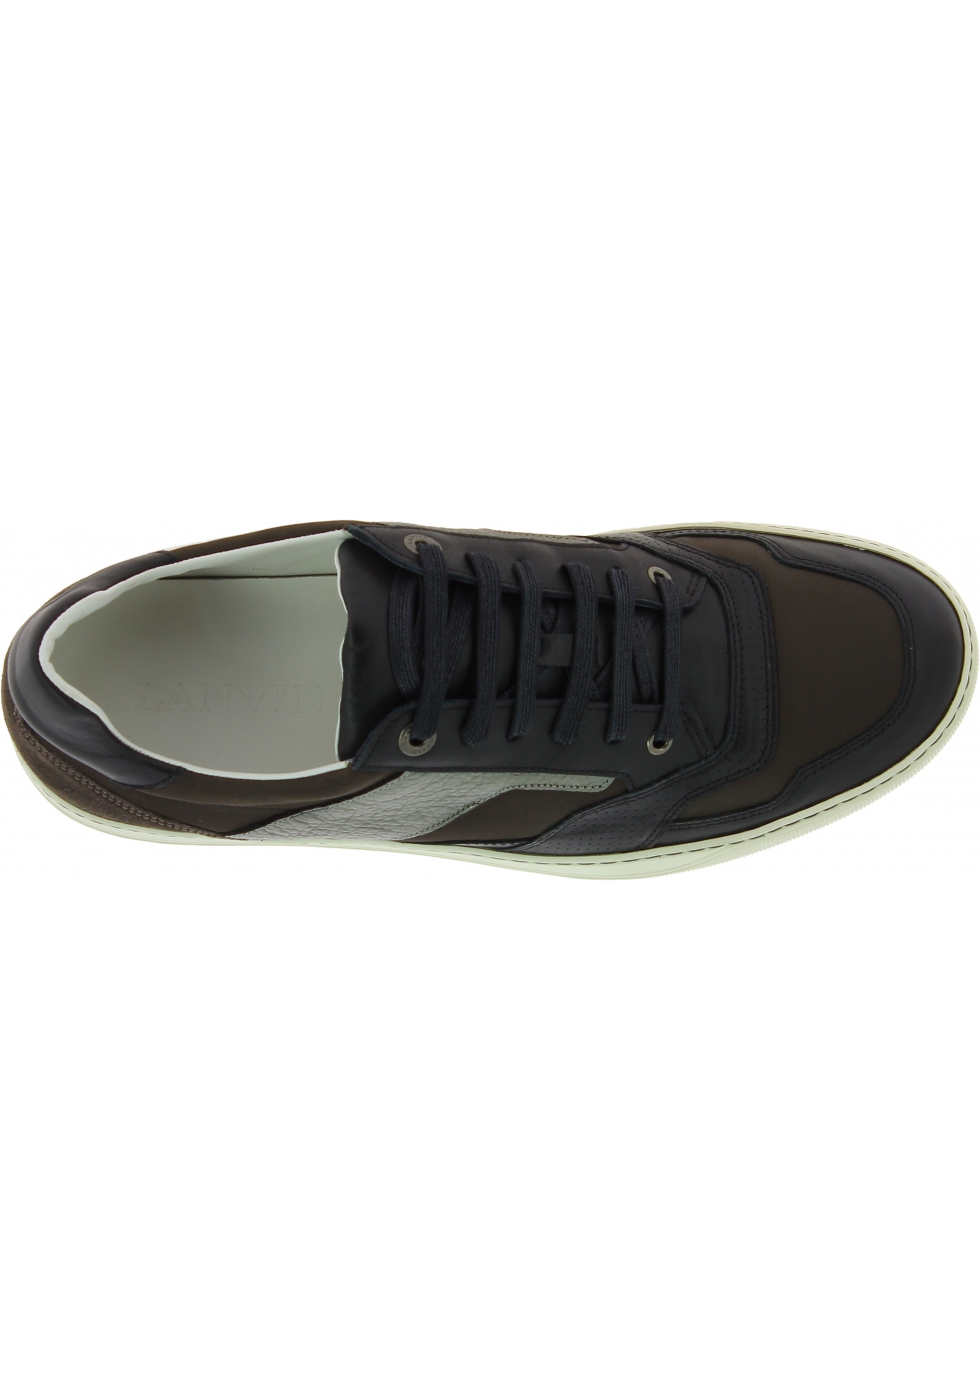 Lanvin men's lace up sneakers in black leather - Italian Boutique